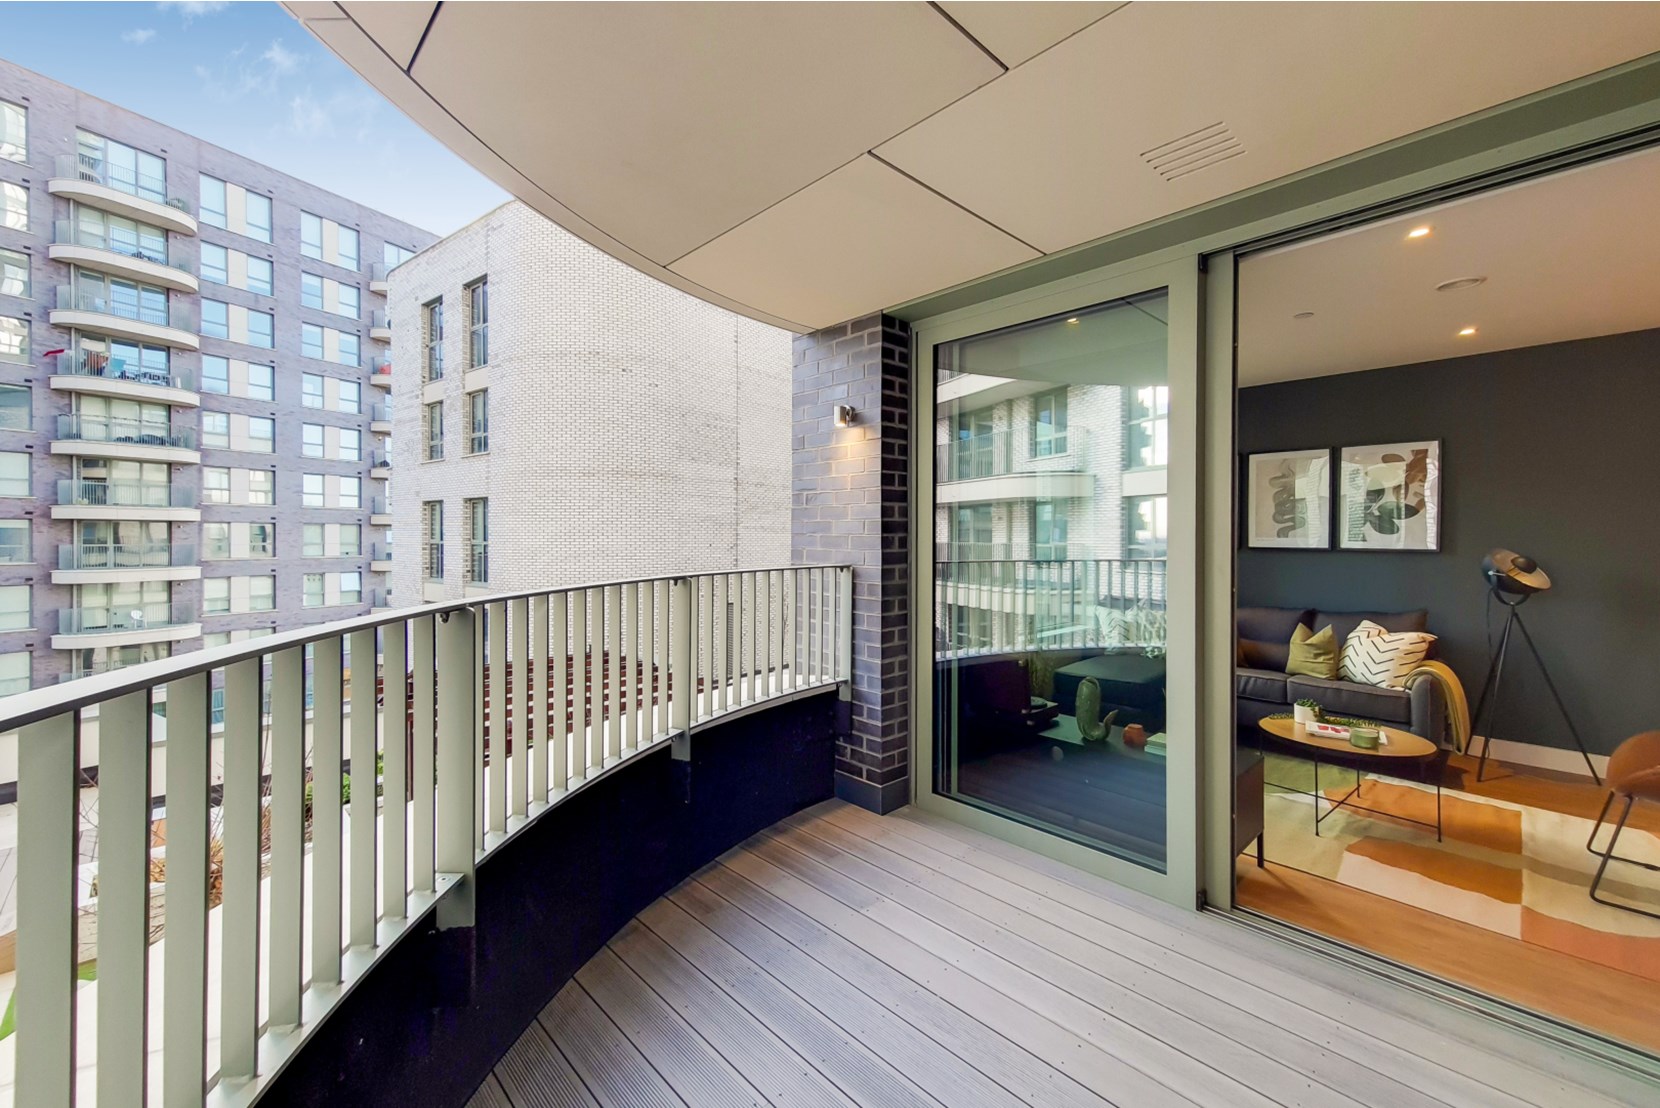 Apartments to Rent by Folio at Oaklands Rise, Brent, NW10, private balcony